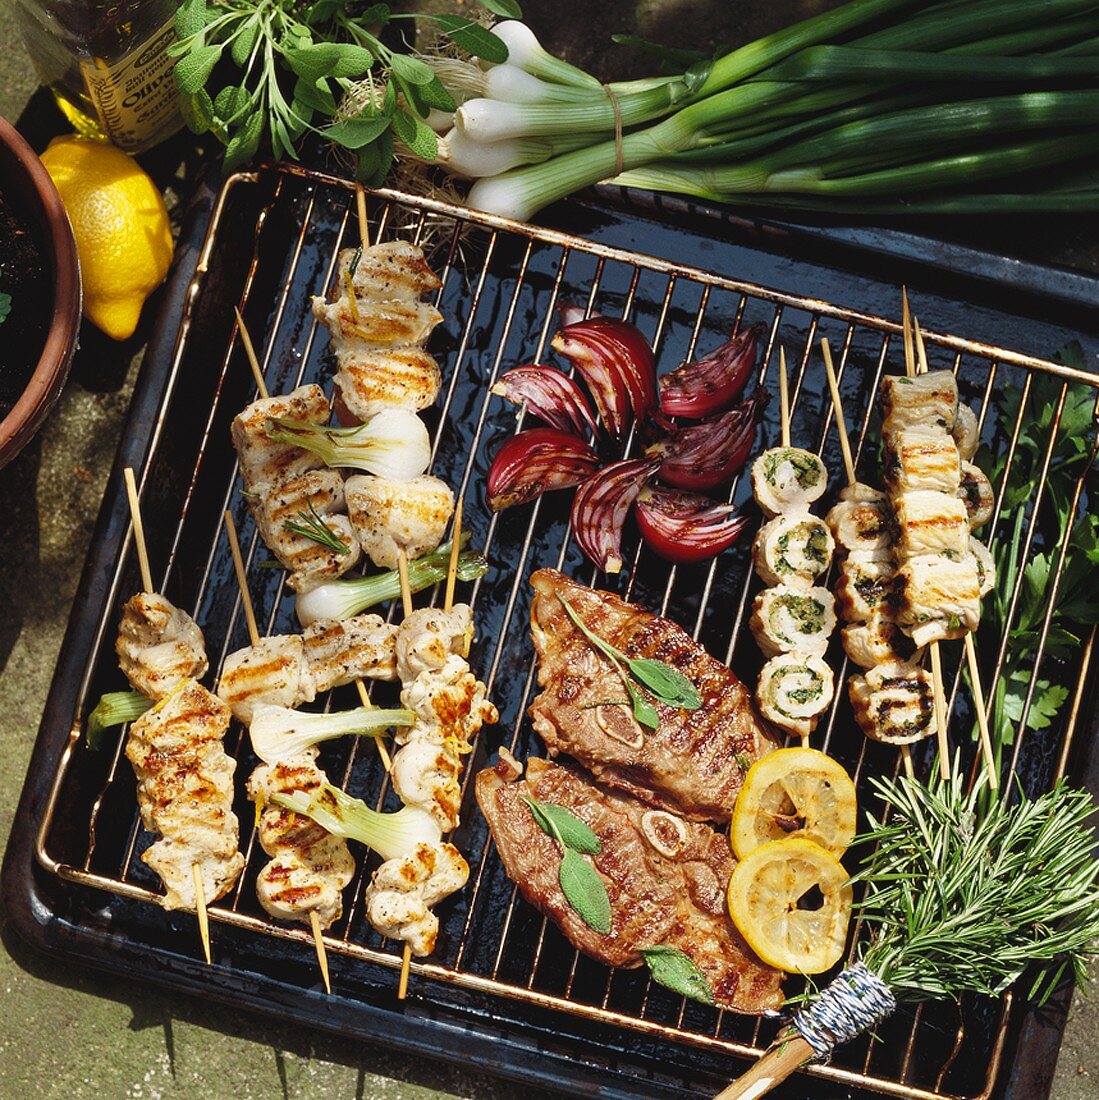 Lamb and various types of kebabs on grill rack